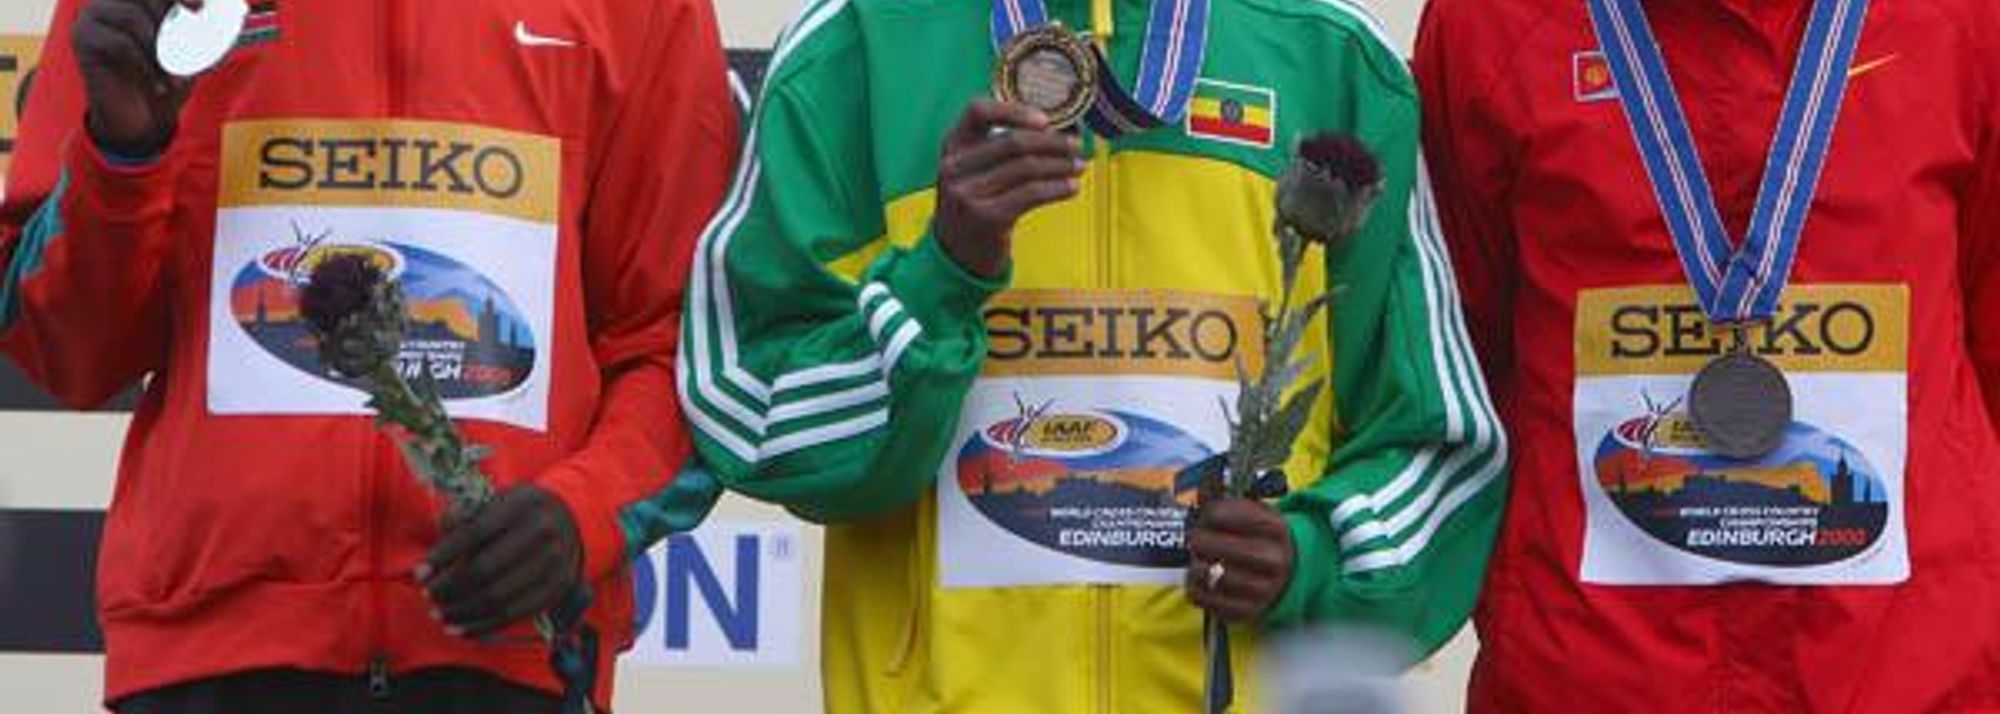 -&nbsp;Edinburgh, Scotland&nbsp;– The idea that Leonard Patrick Komon would go on to take the individual silver medal in the Senior Men’s race at the 36th IAAF World Cross Country Championships here today would have seemed faintly absurd to anybody hearing the suggestion midway through the Kenyan trial to pick the team four weeks ago.</P>